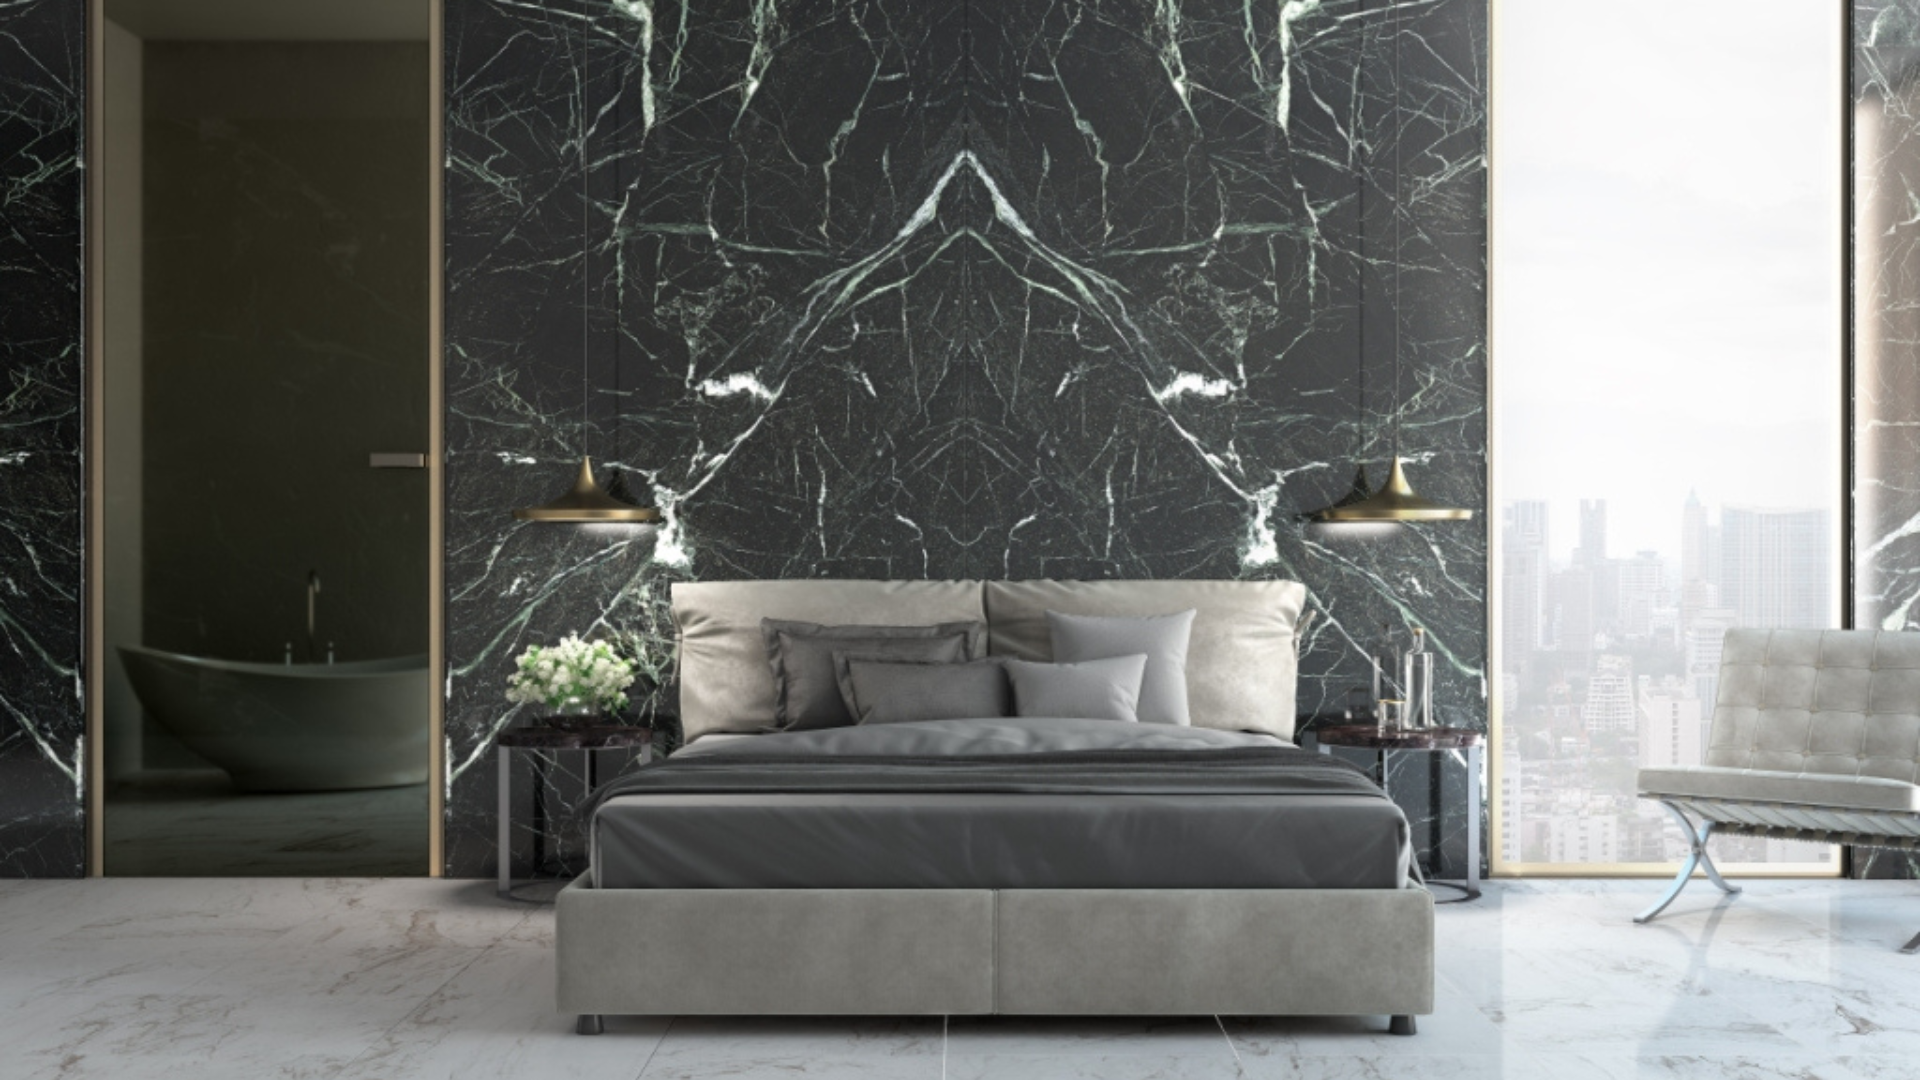 Rendering of bedroom with veria green marble in the wall with the bookmatch process, dark green hues with white veins, with a bed and fabrics in shades of grey